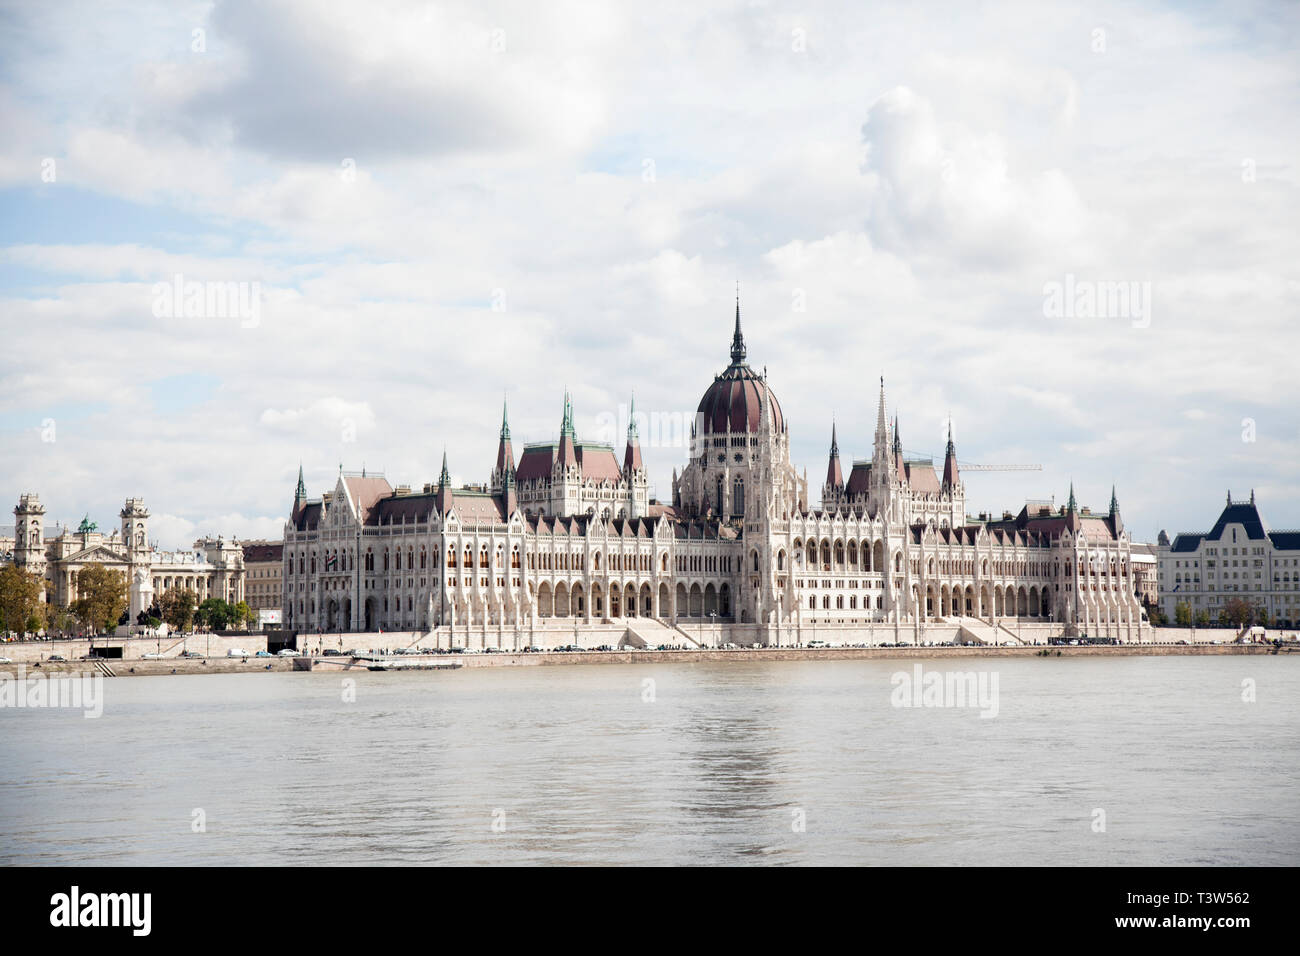 BUDAPEST, HUNGARY - SEPTEMBER 22, 2017: The Hungarian Parliament buidings as viewed from the Buda side of the Danube River. Stock Photo